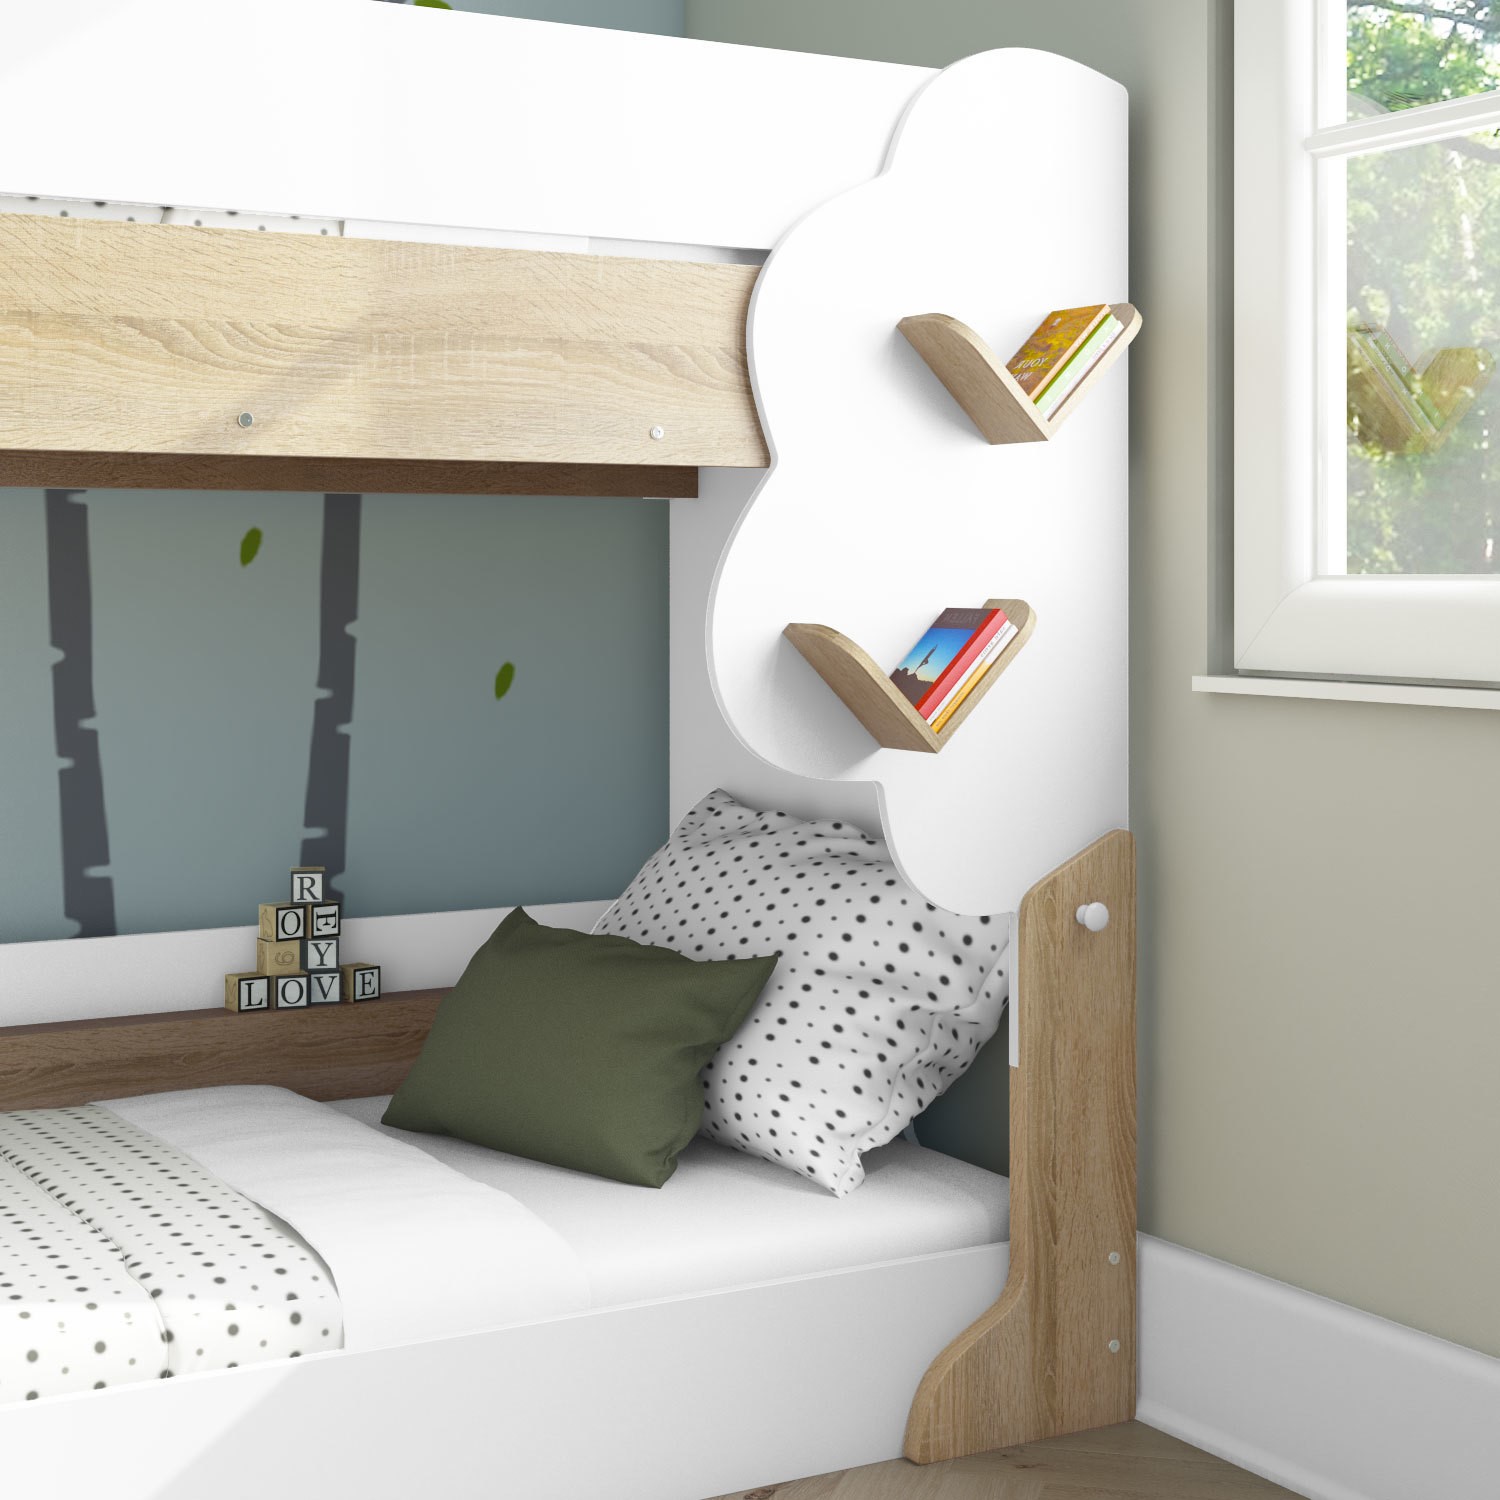 Read more about White and oak tree bunk bed with shelves hadley